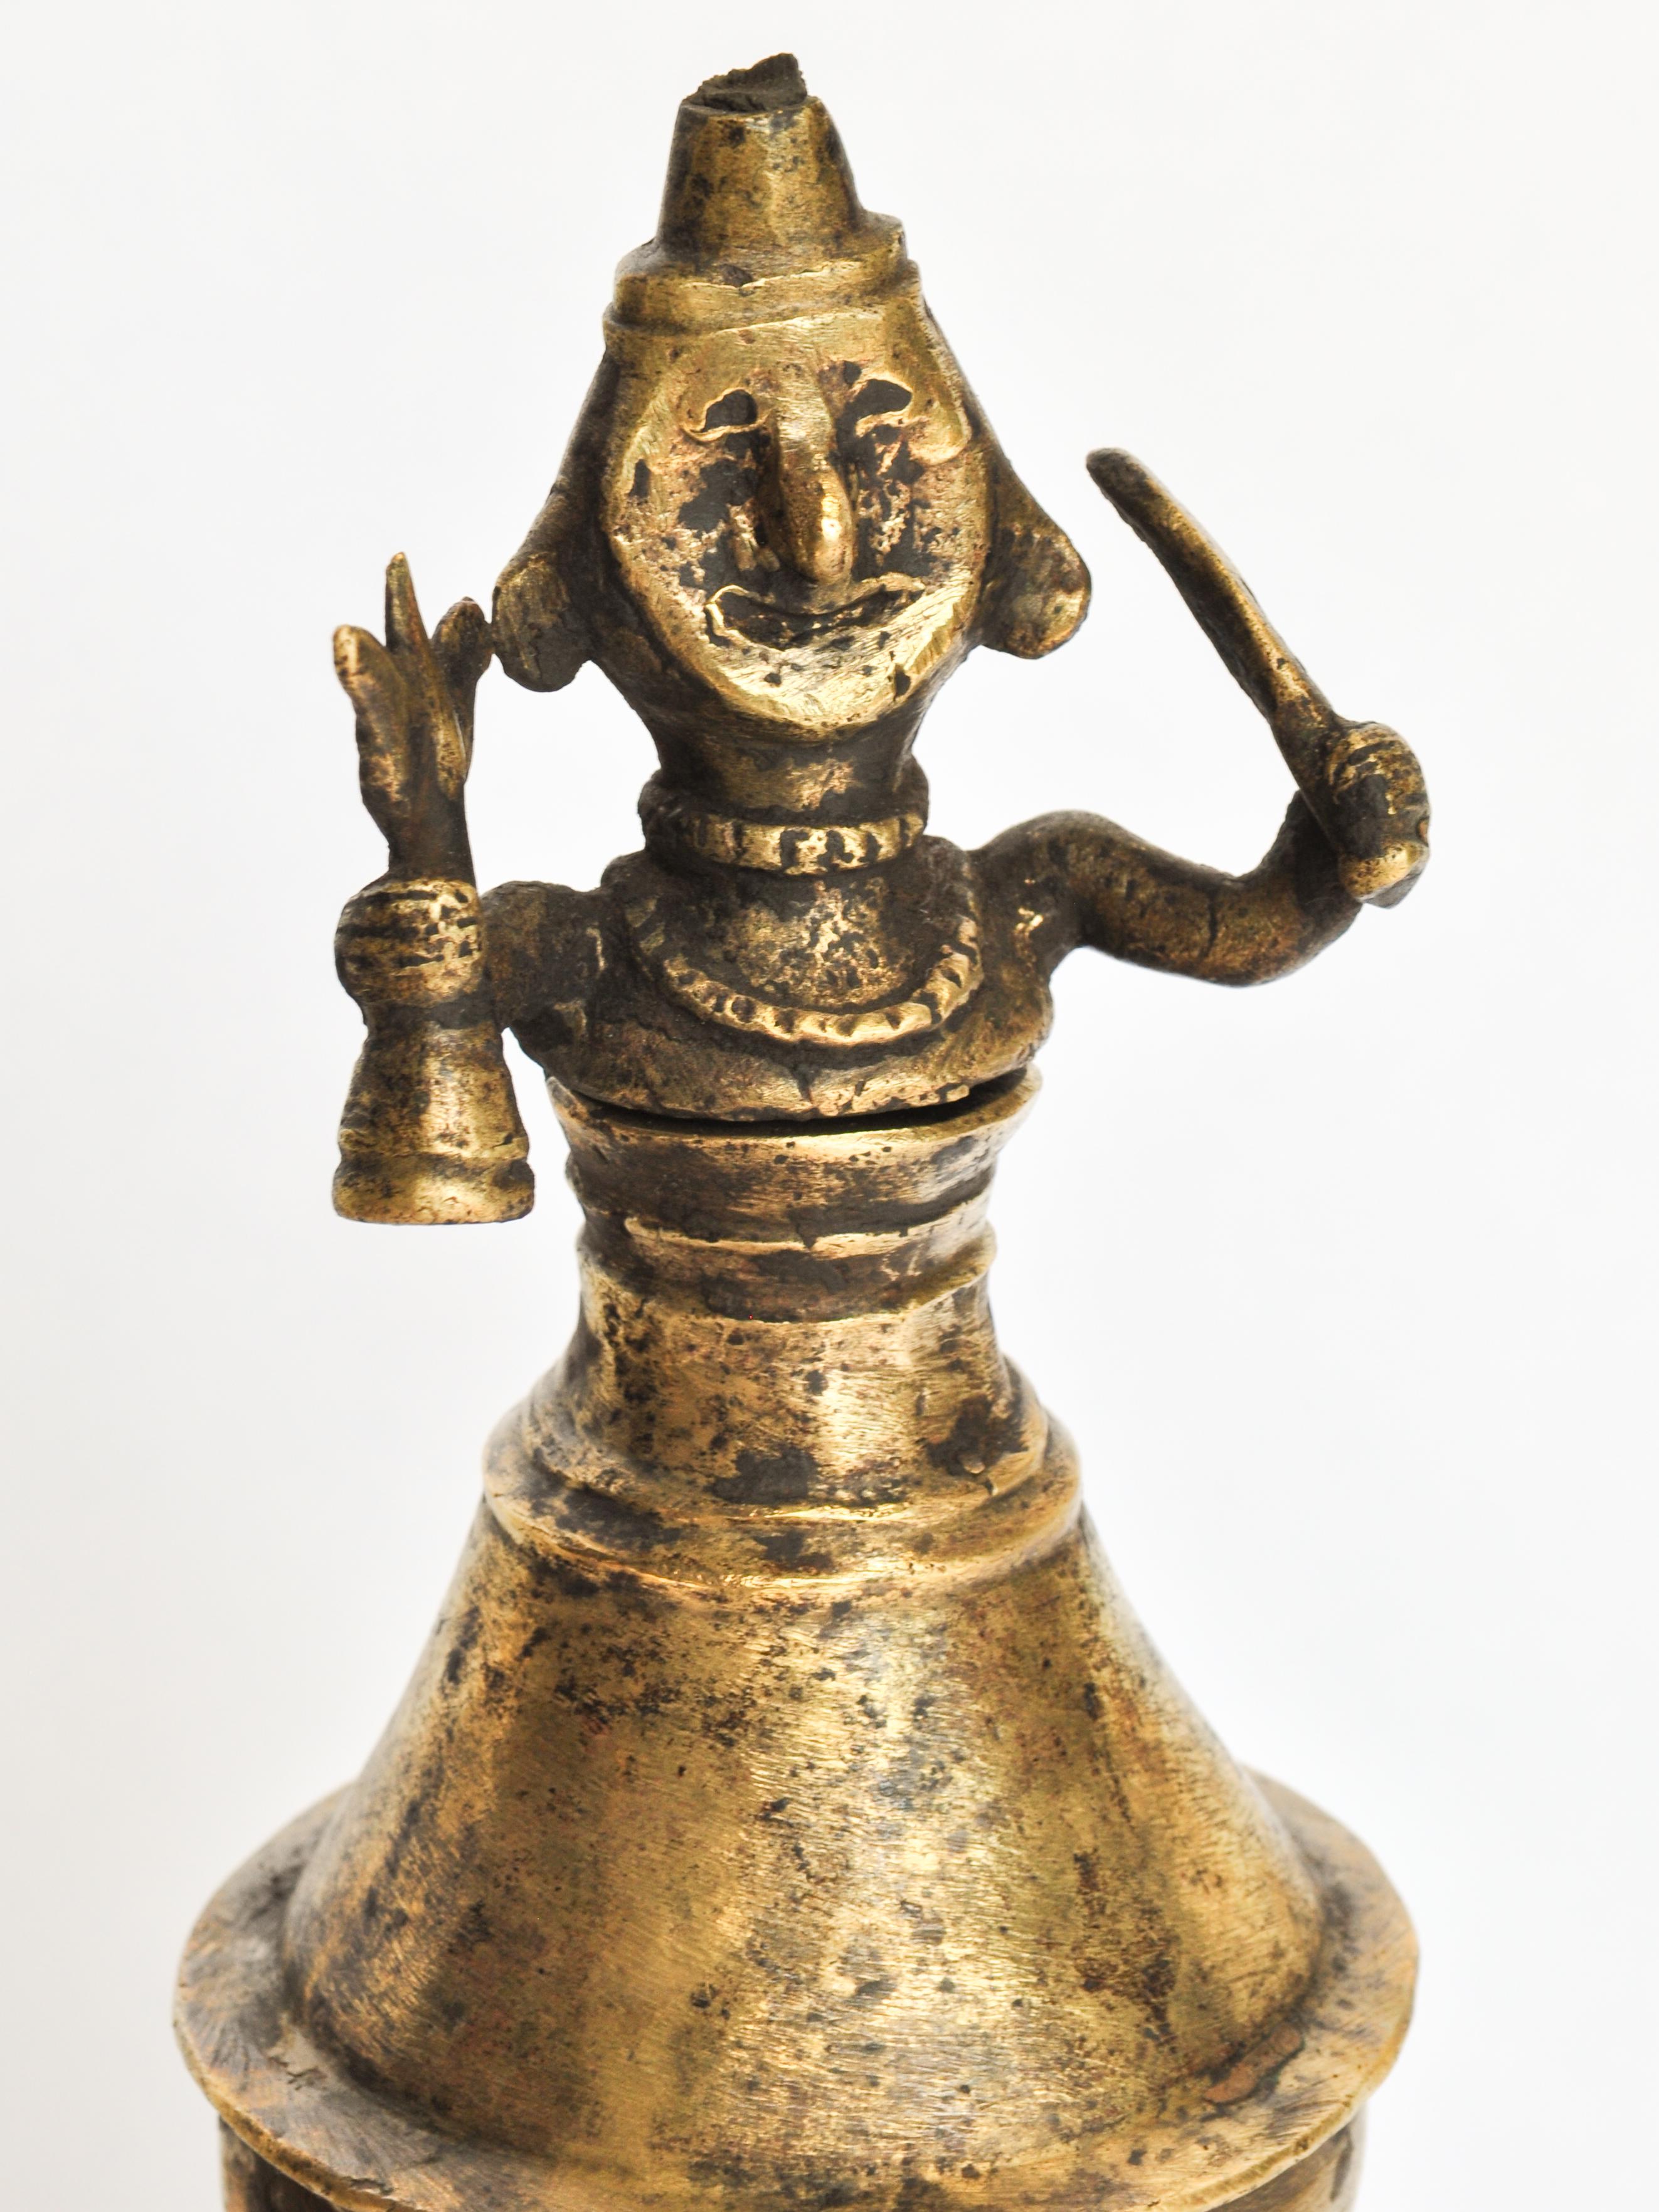 Tribal Vintage Bronze Oil Lamp with Shaman Figure from West Nepal, Mid-20th Century